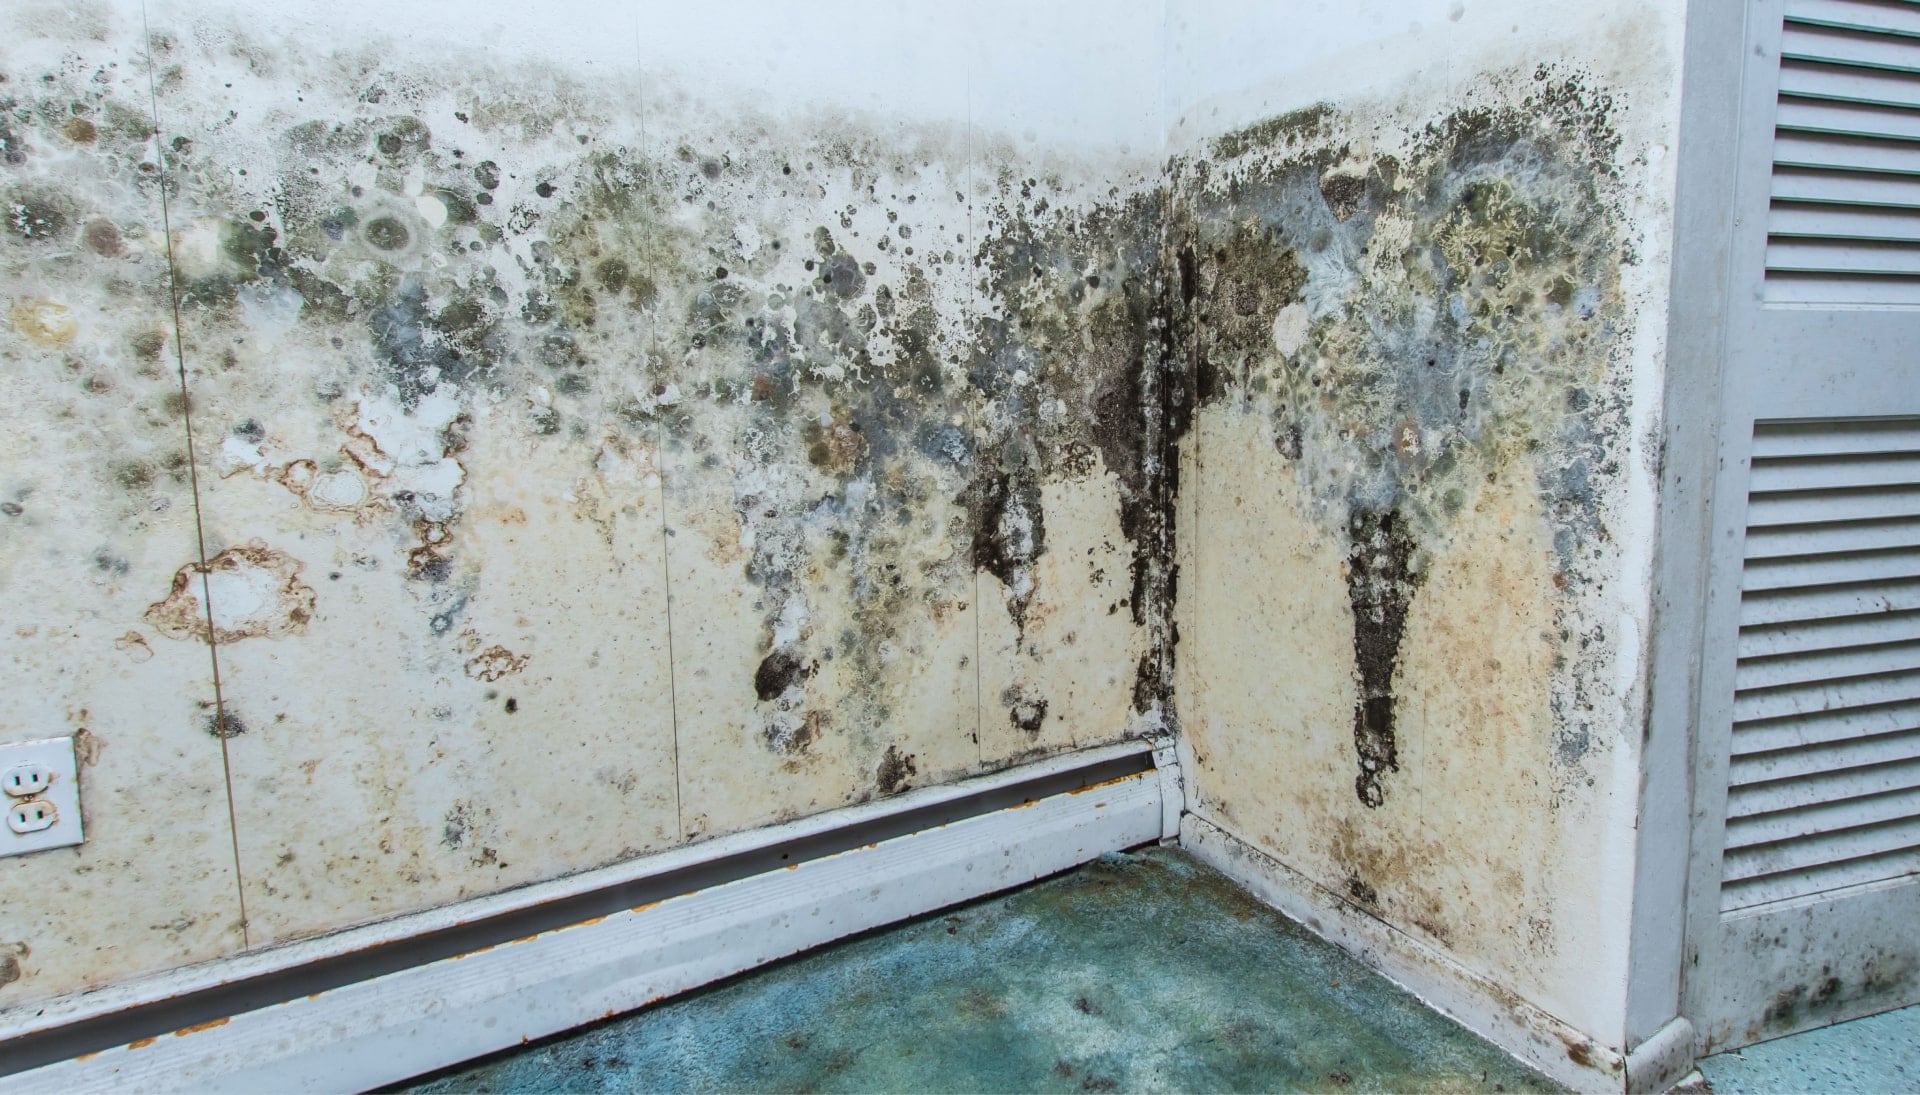 A mold remediation team using specialized techniques to remove mold damage and control odors in a Austin property, with a focus on safety and efficiency